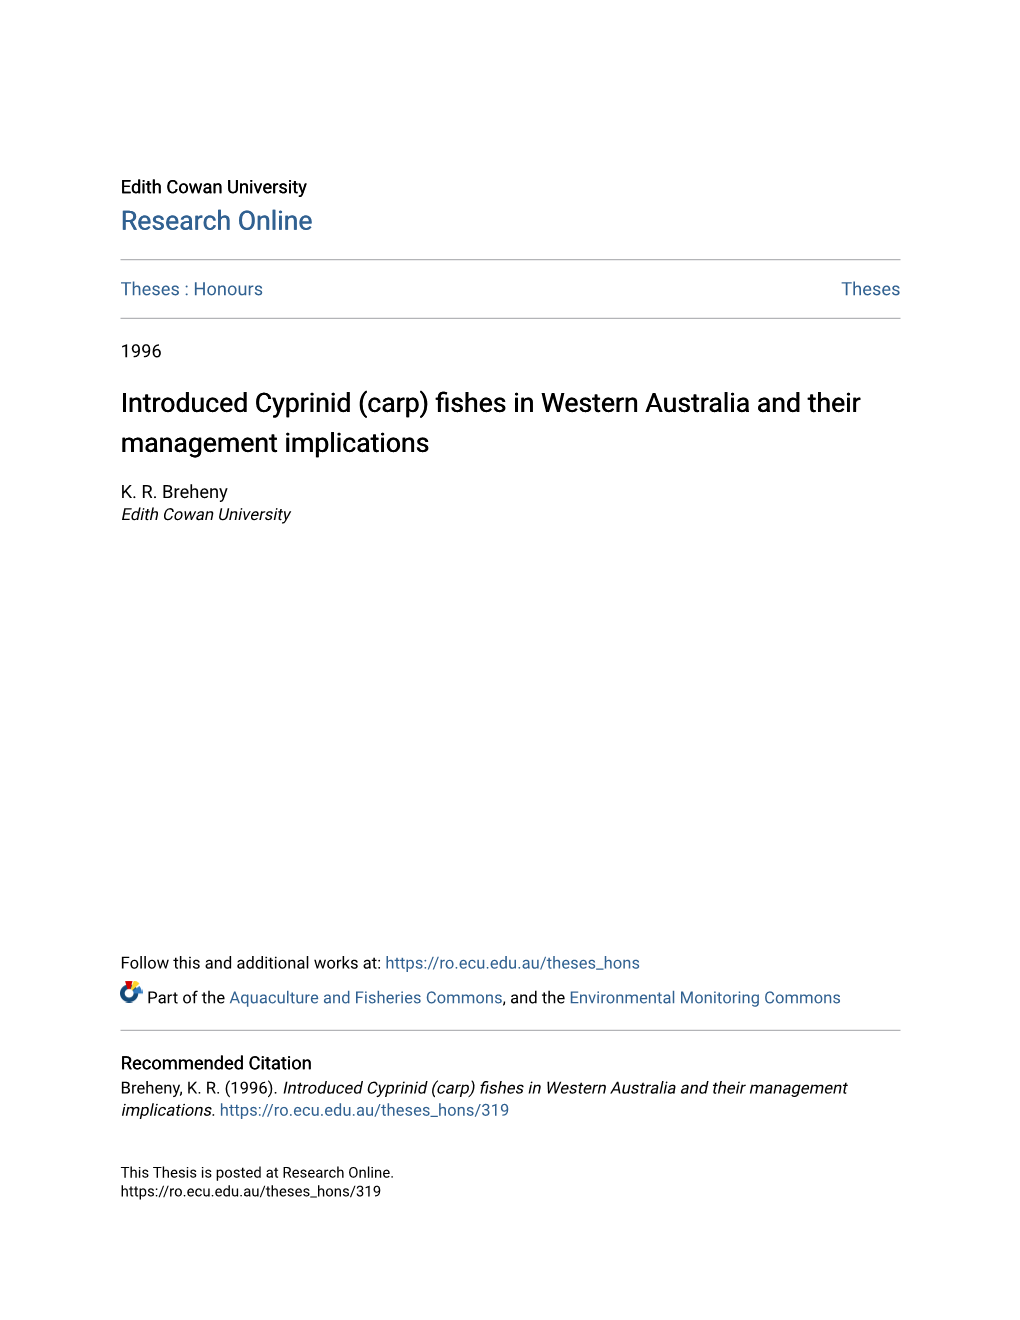 Introduced Cyprinid (Carp) Fishes in Western Australia and Their Management Implications